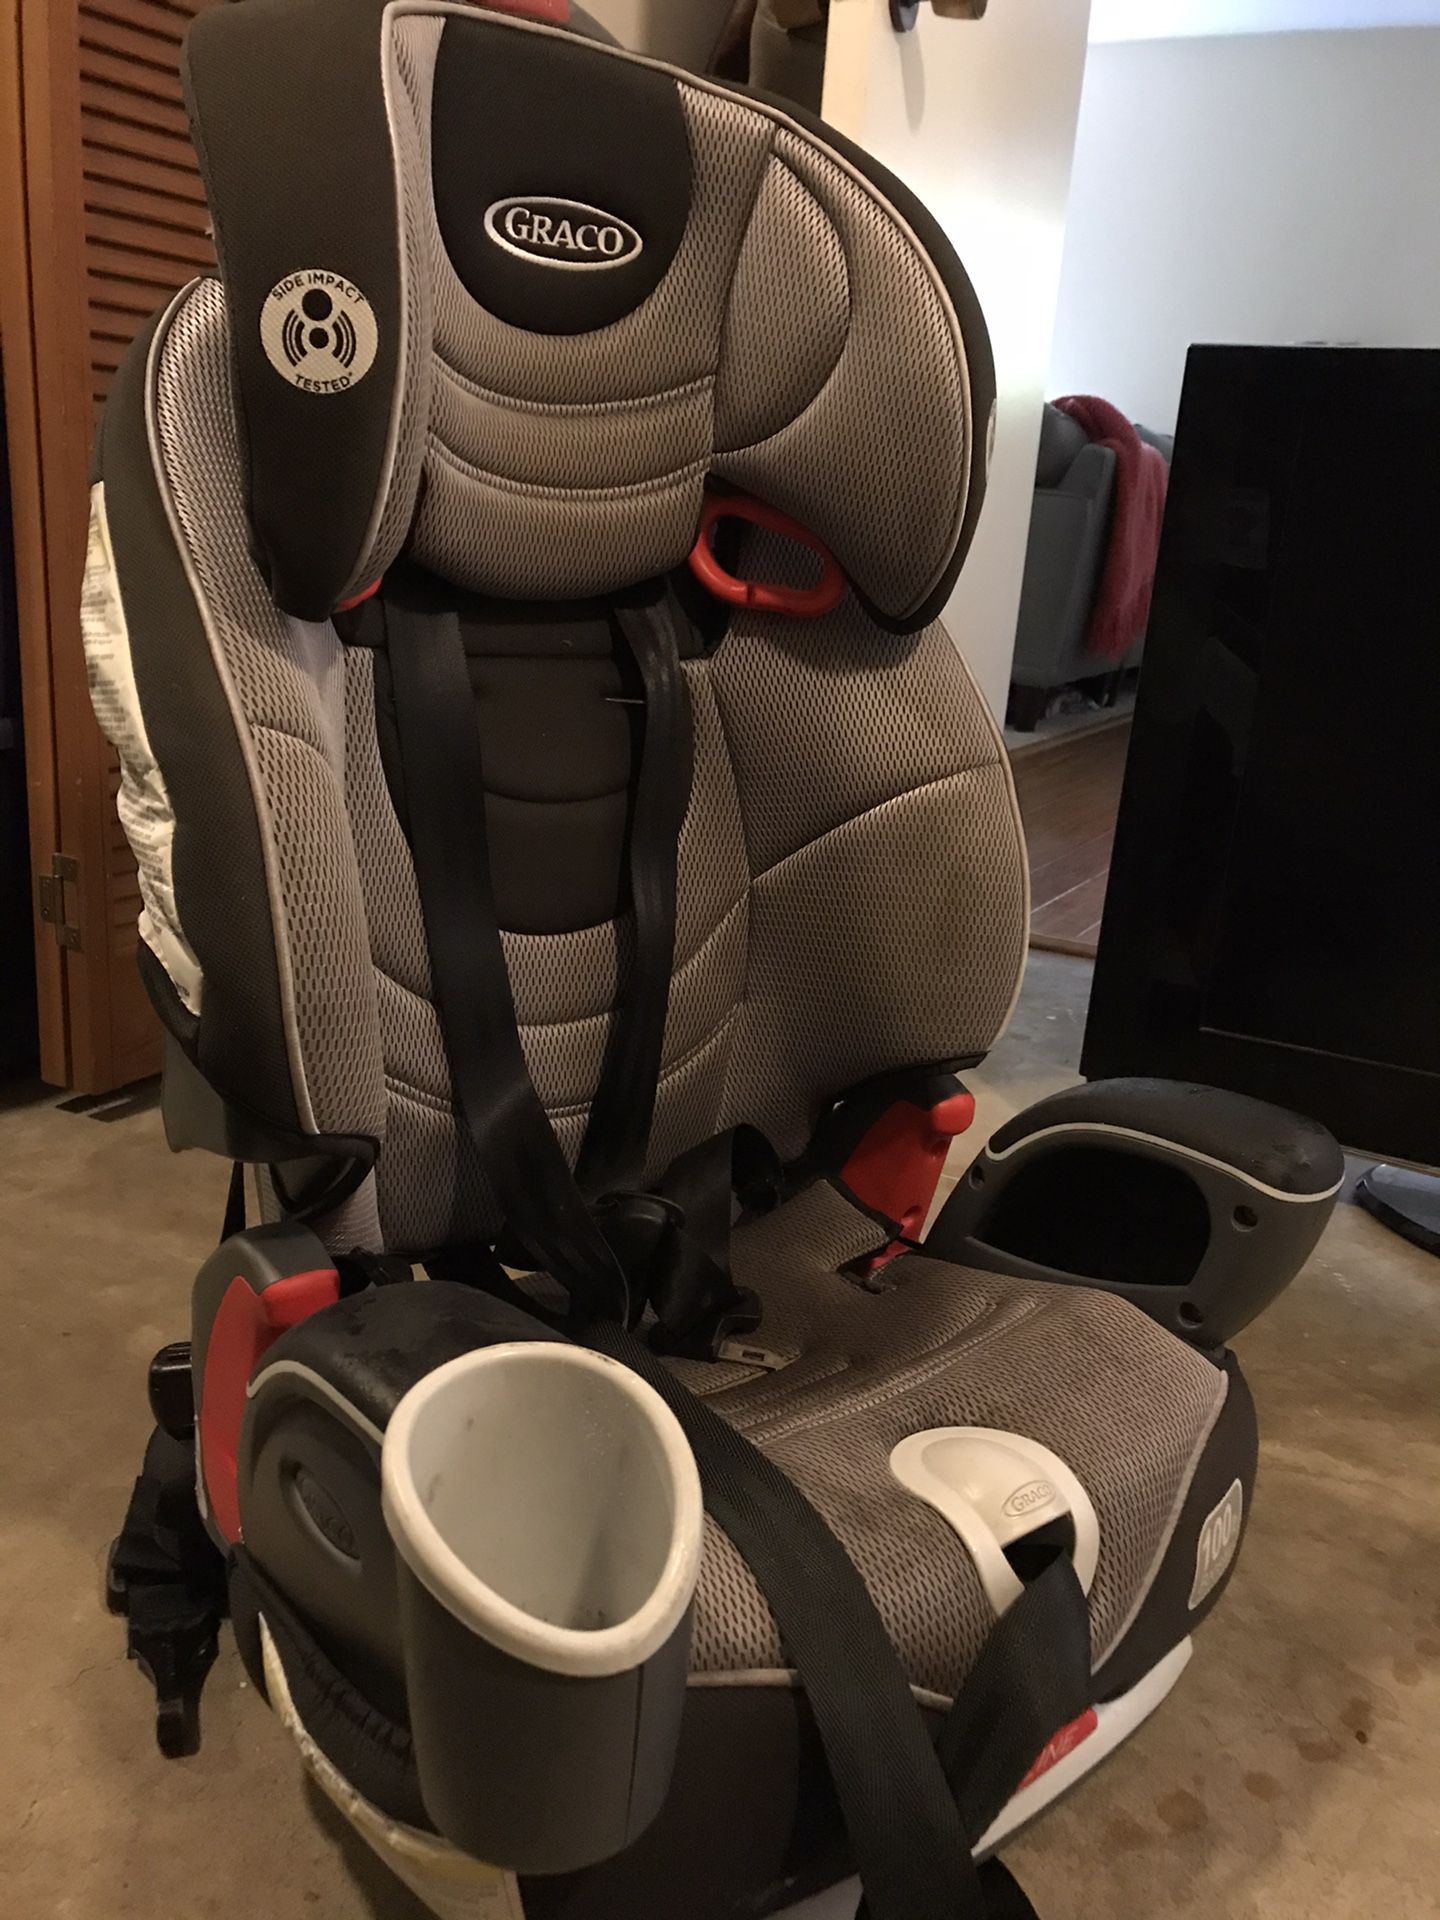 Graco Nautilus car seat and booster seat in one. Up to 100lb booster.